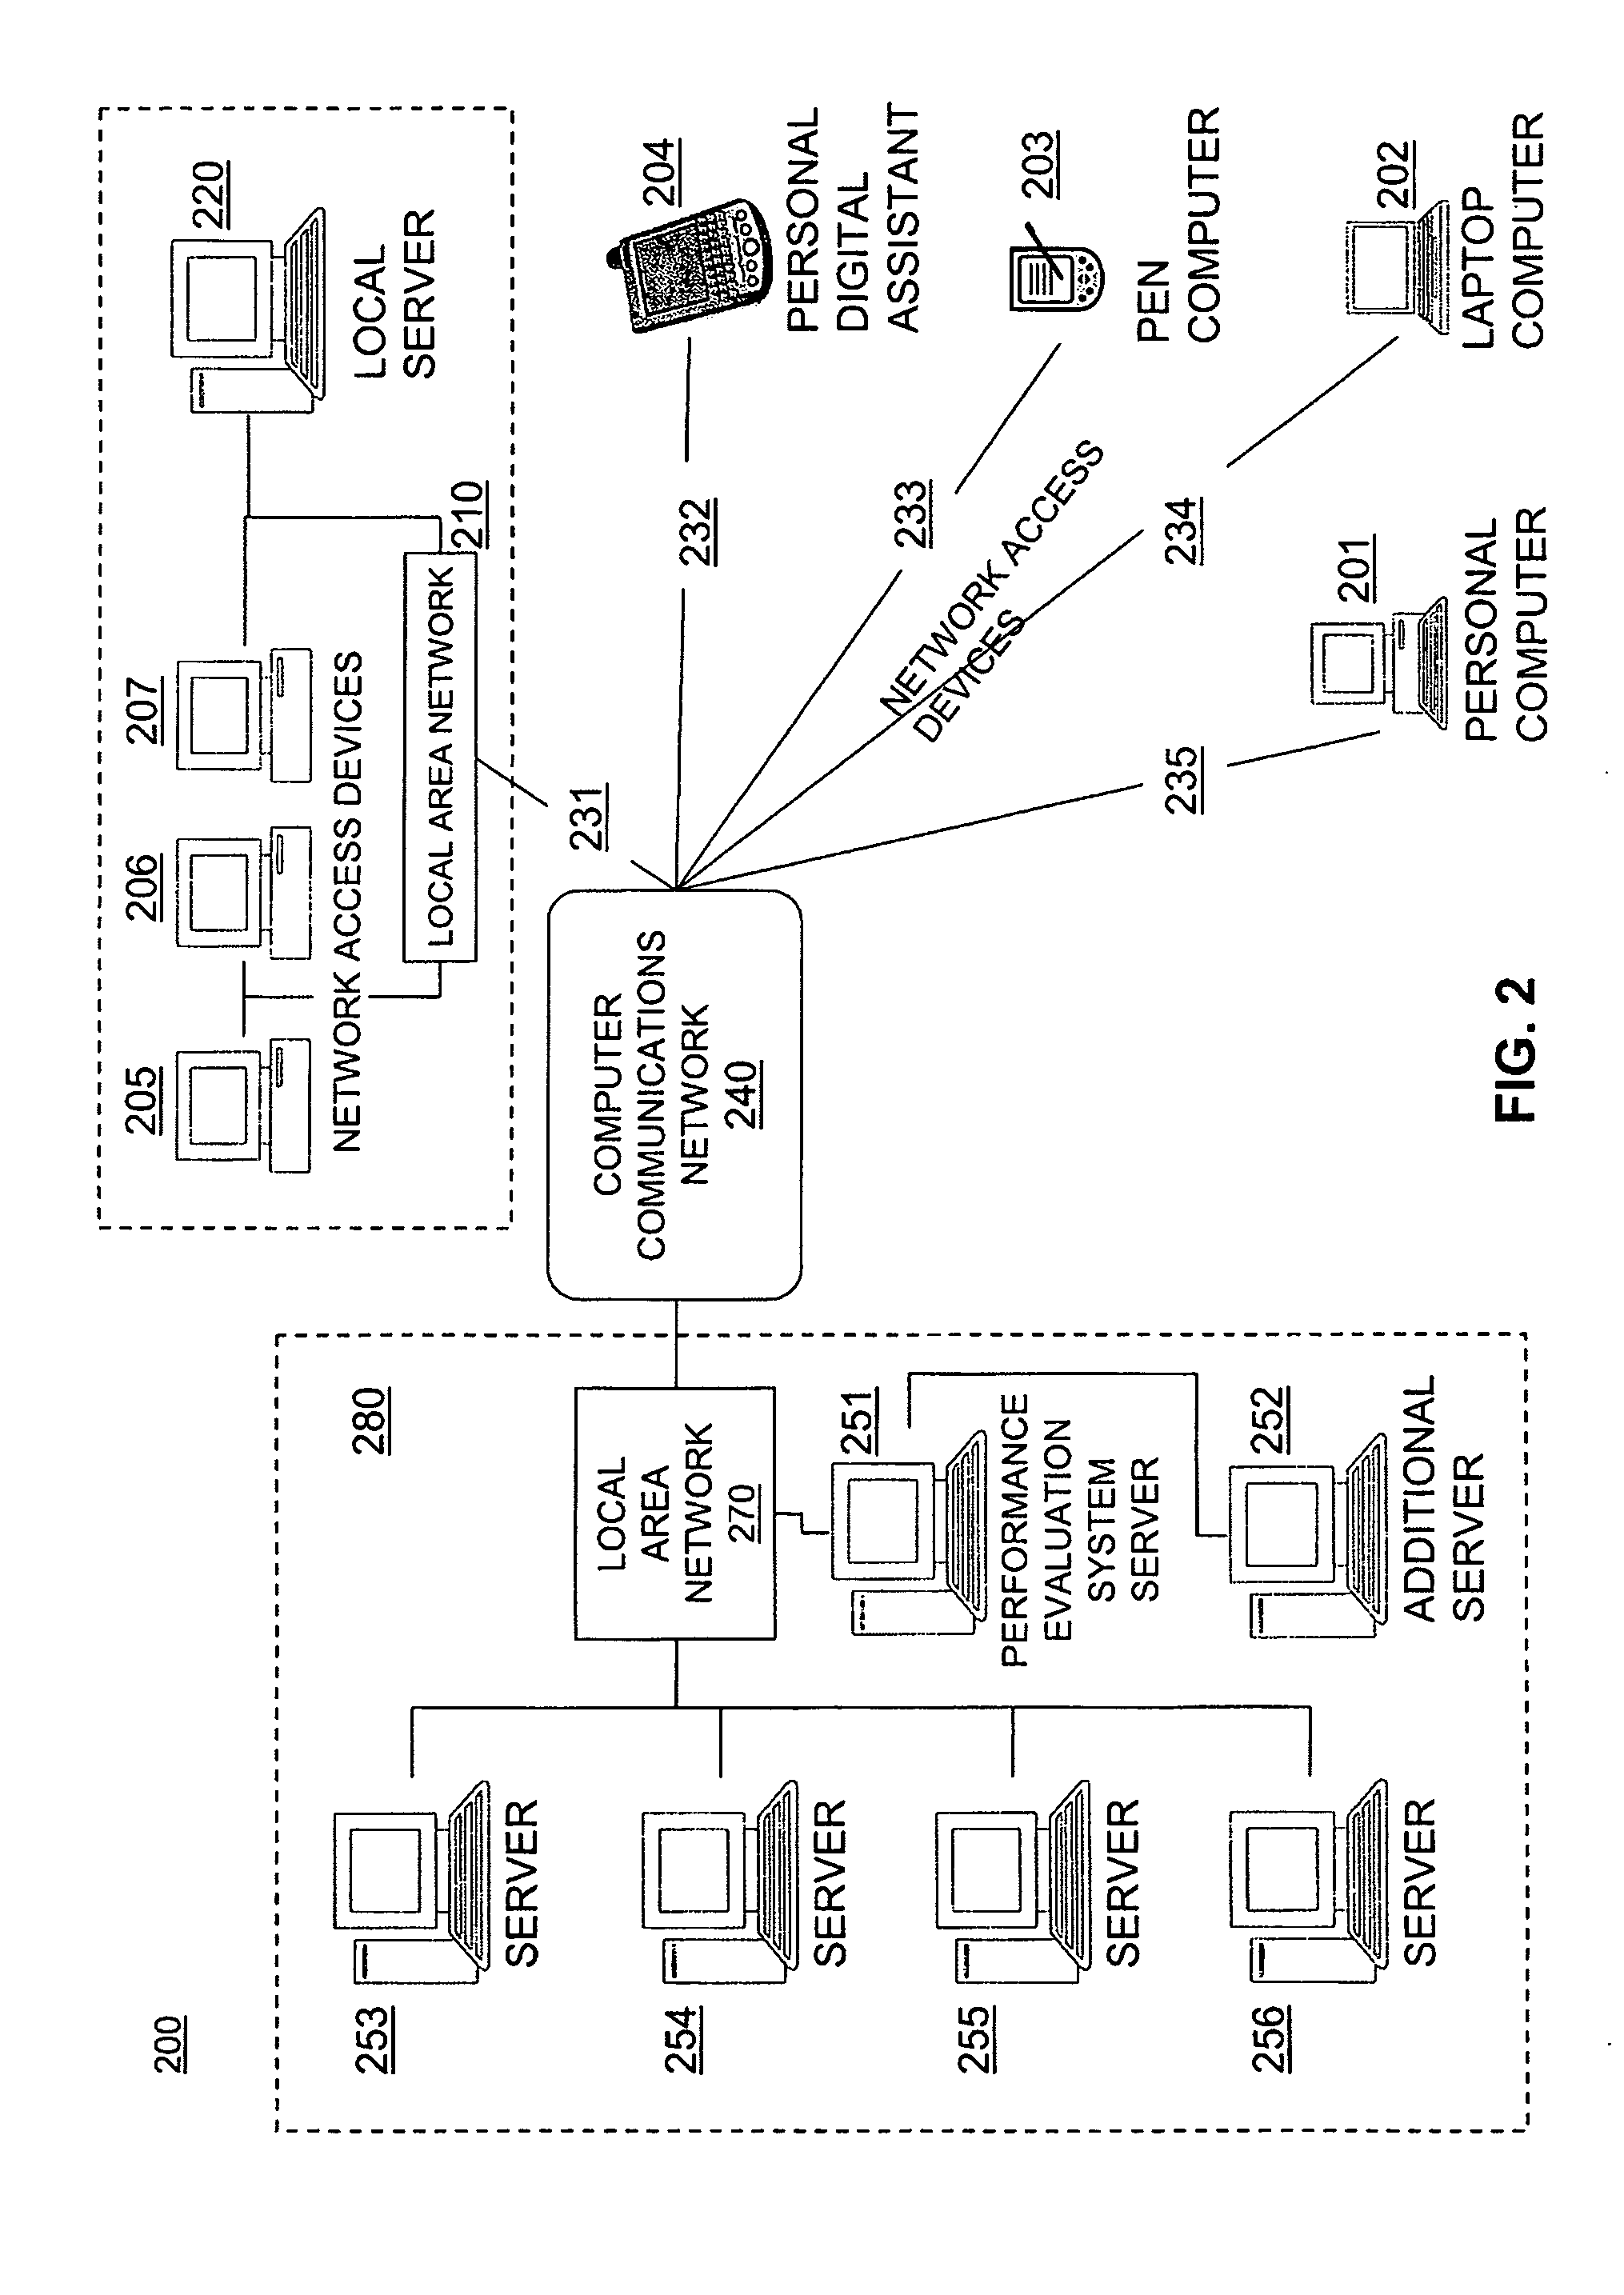 System and method for rating performance